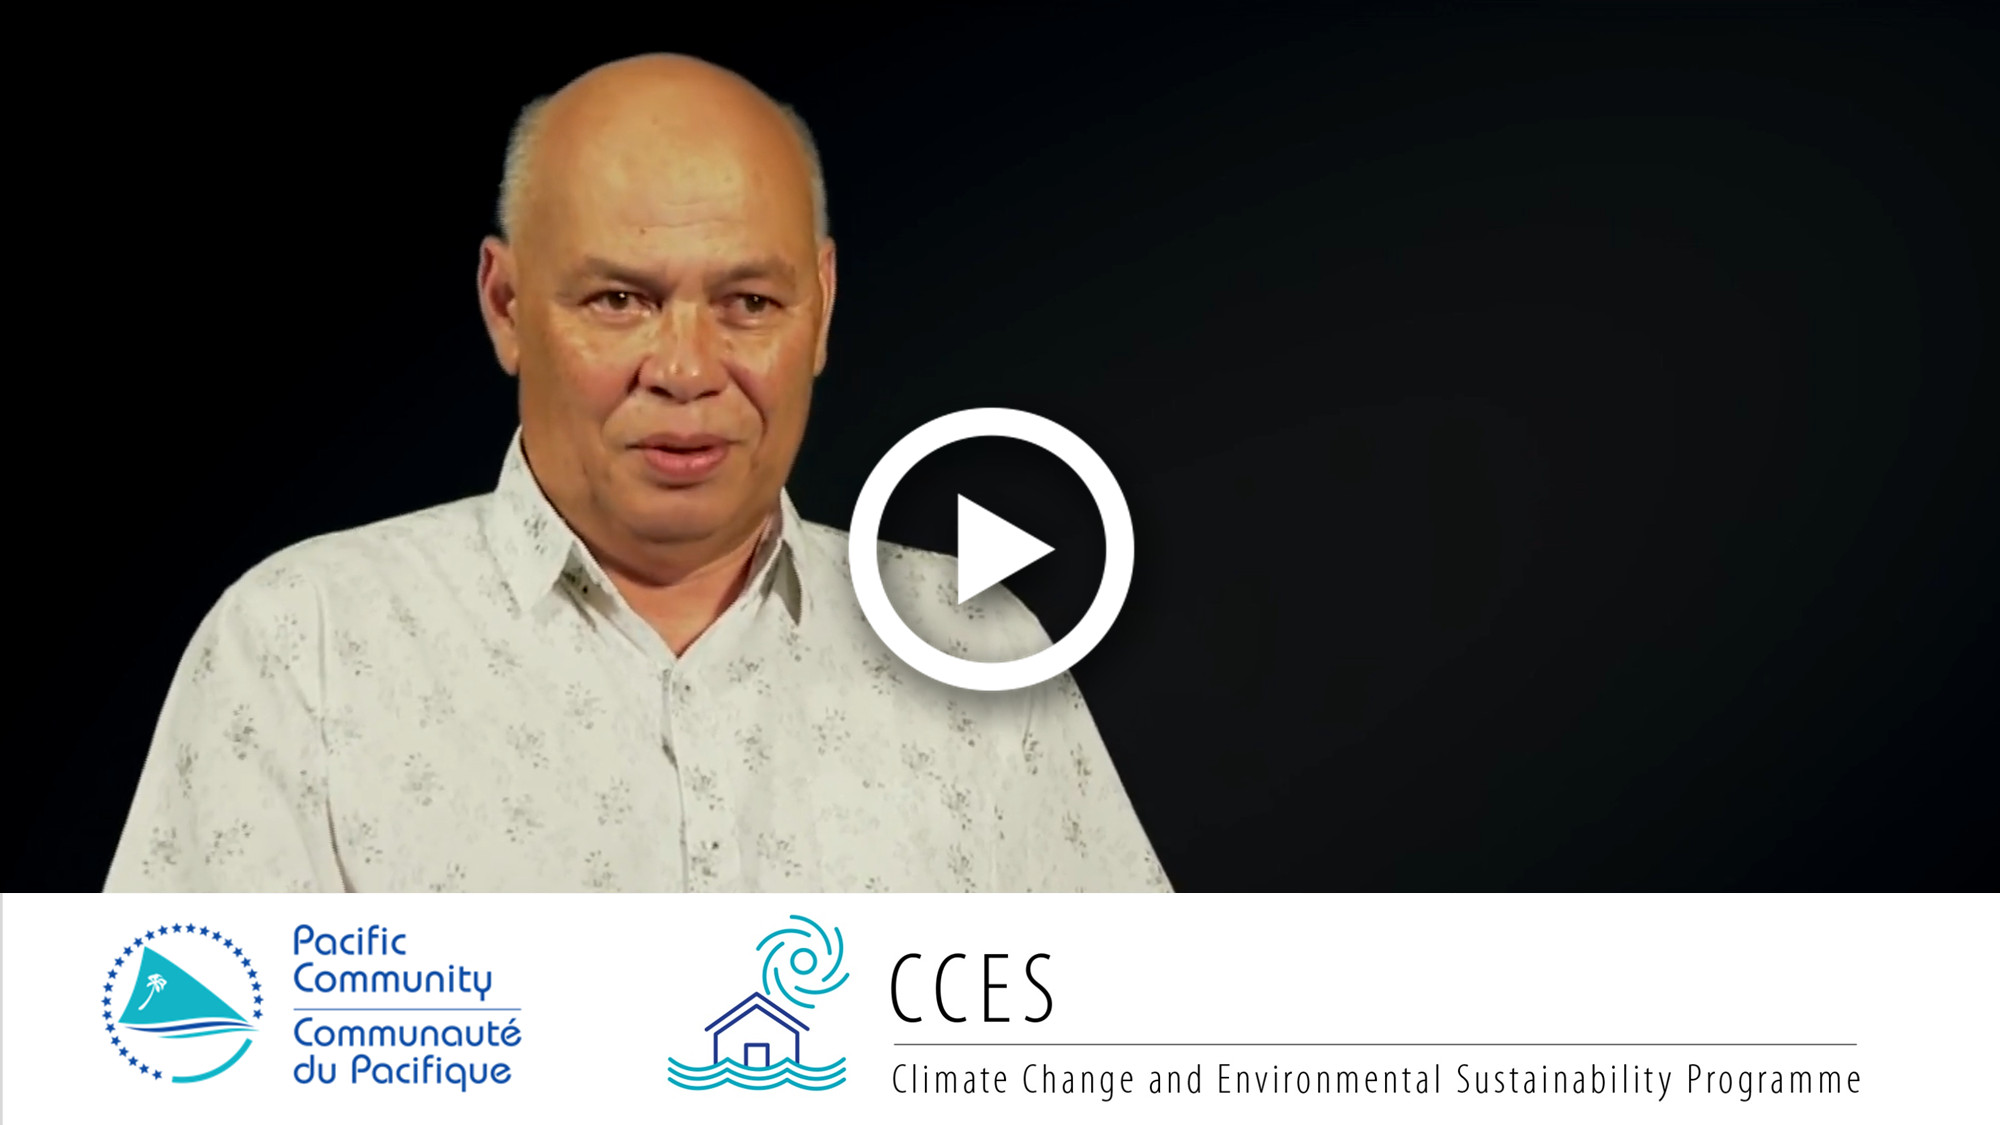 Colin Tukuitonga, SPC Director-General on Climate Change